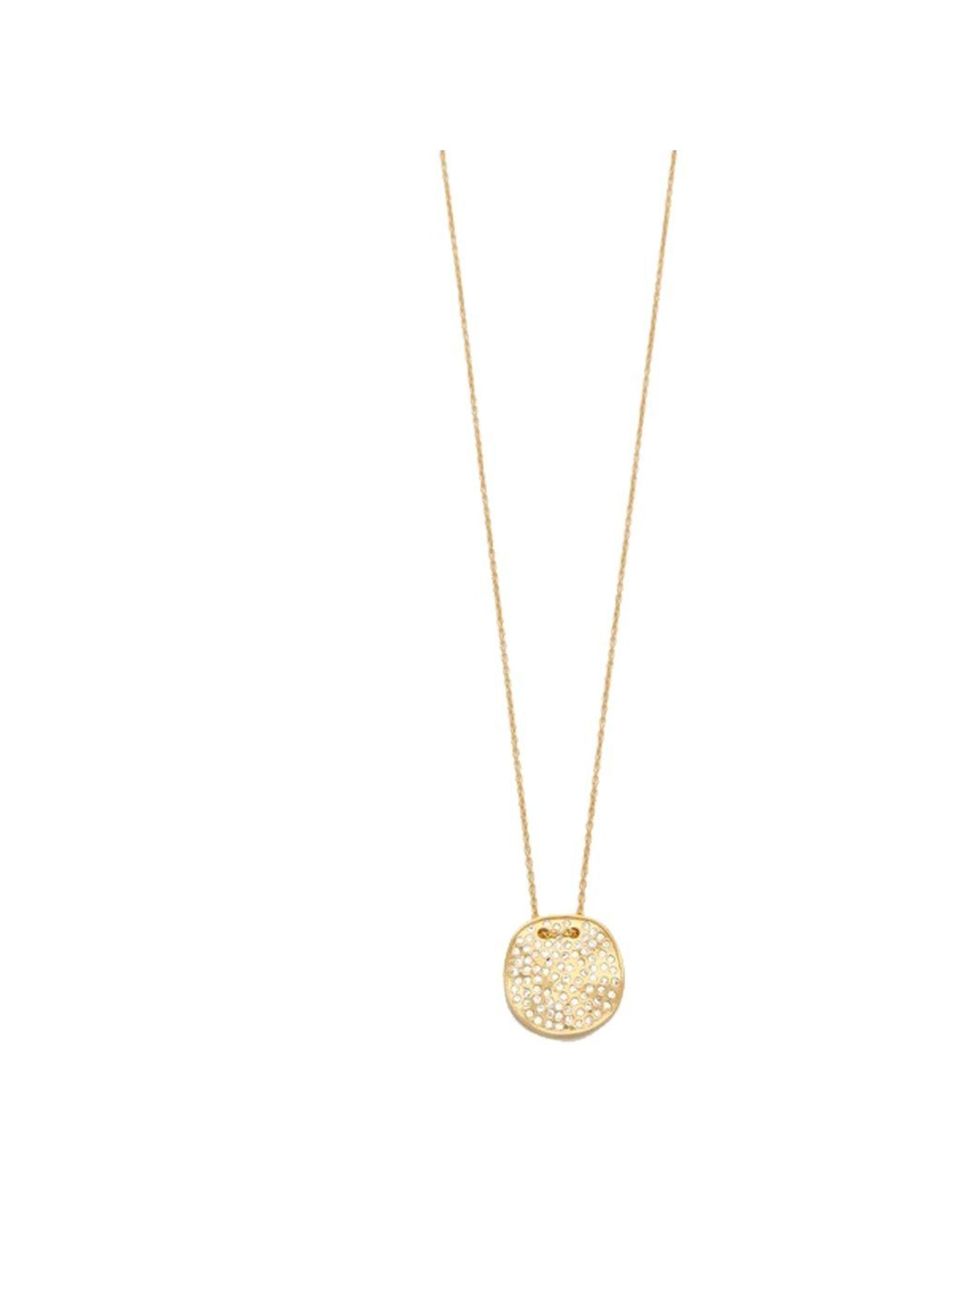 <p>It's gold, it's massive and it sparkles. What's not to love about this Gorjana necklace, £59, at <a href="http://www.shopbop.com/aurora-large-necklace-gorjana/vp/v=1/1509291117.htm?folderID=2534374302090405&amp;fm=other-shopbysize-viewall&amp;colorId=2